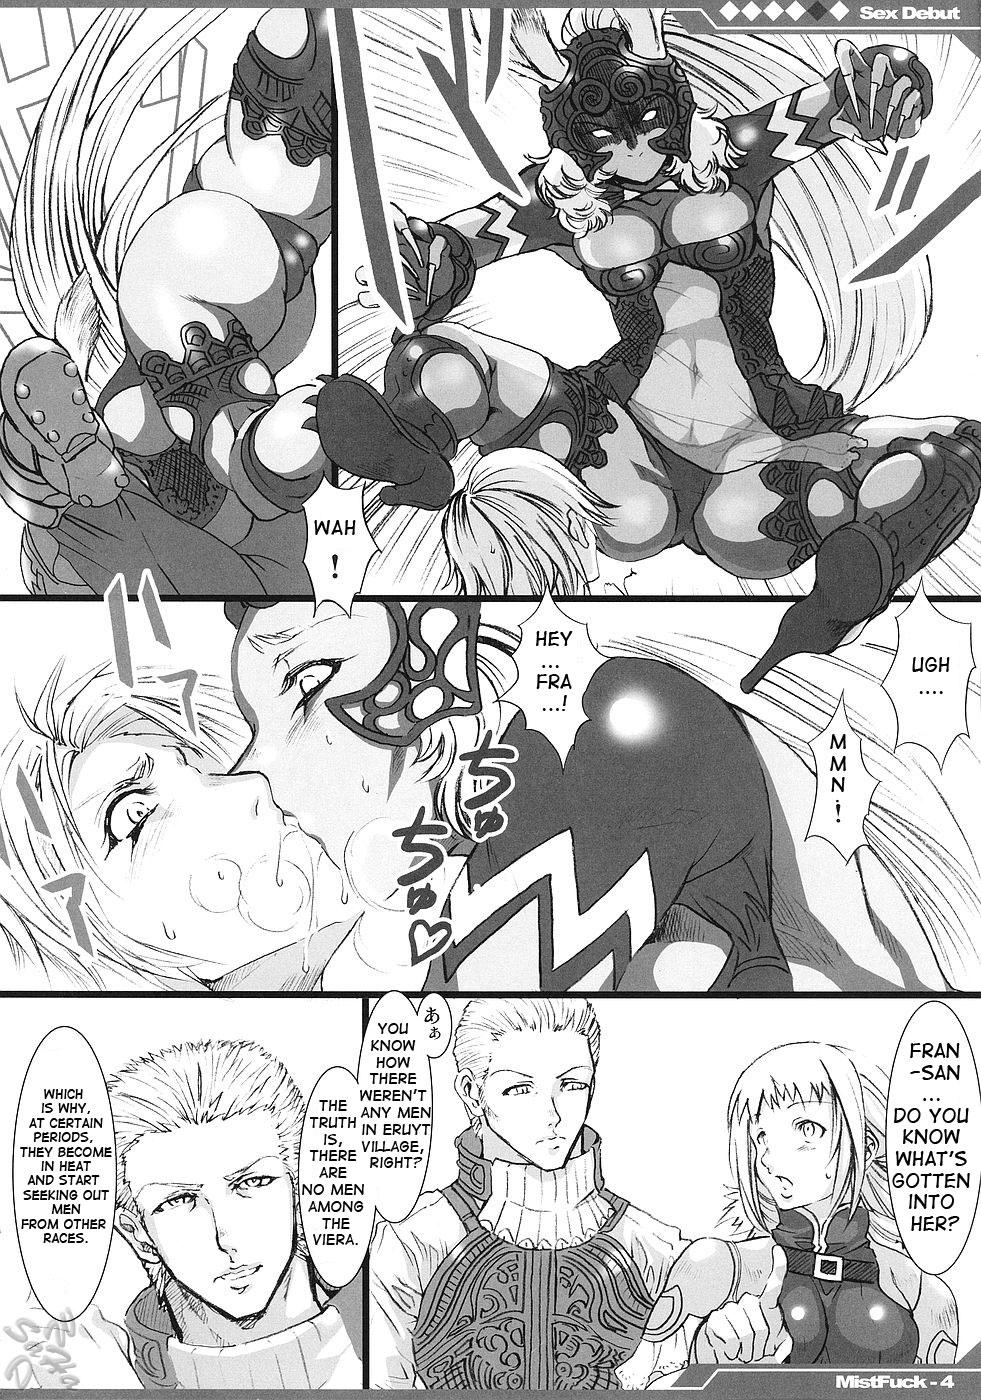 Perfect Pussy Kyou Kara Fuuzoku Debut | Today's the Debut of Sex Service - Final fantasy xii Grandmother - Page 5